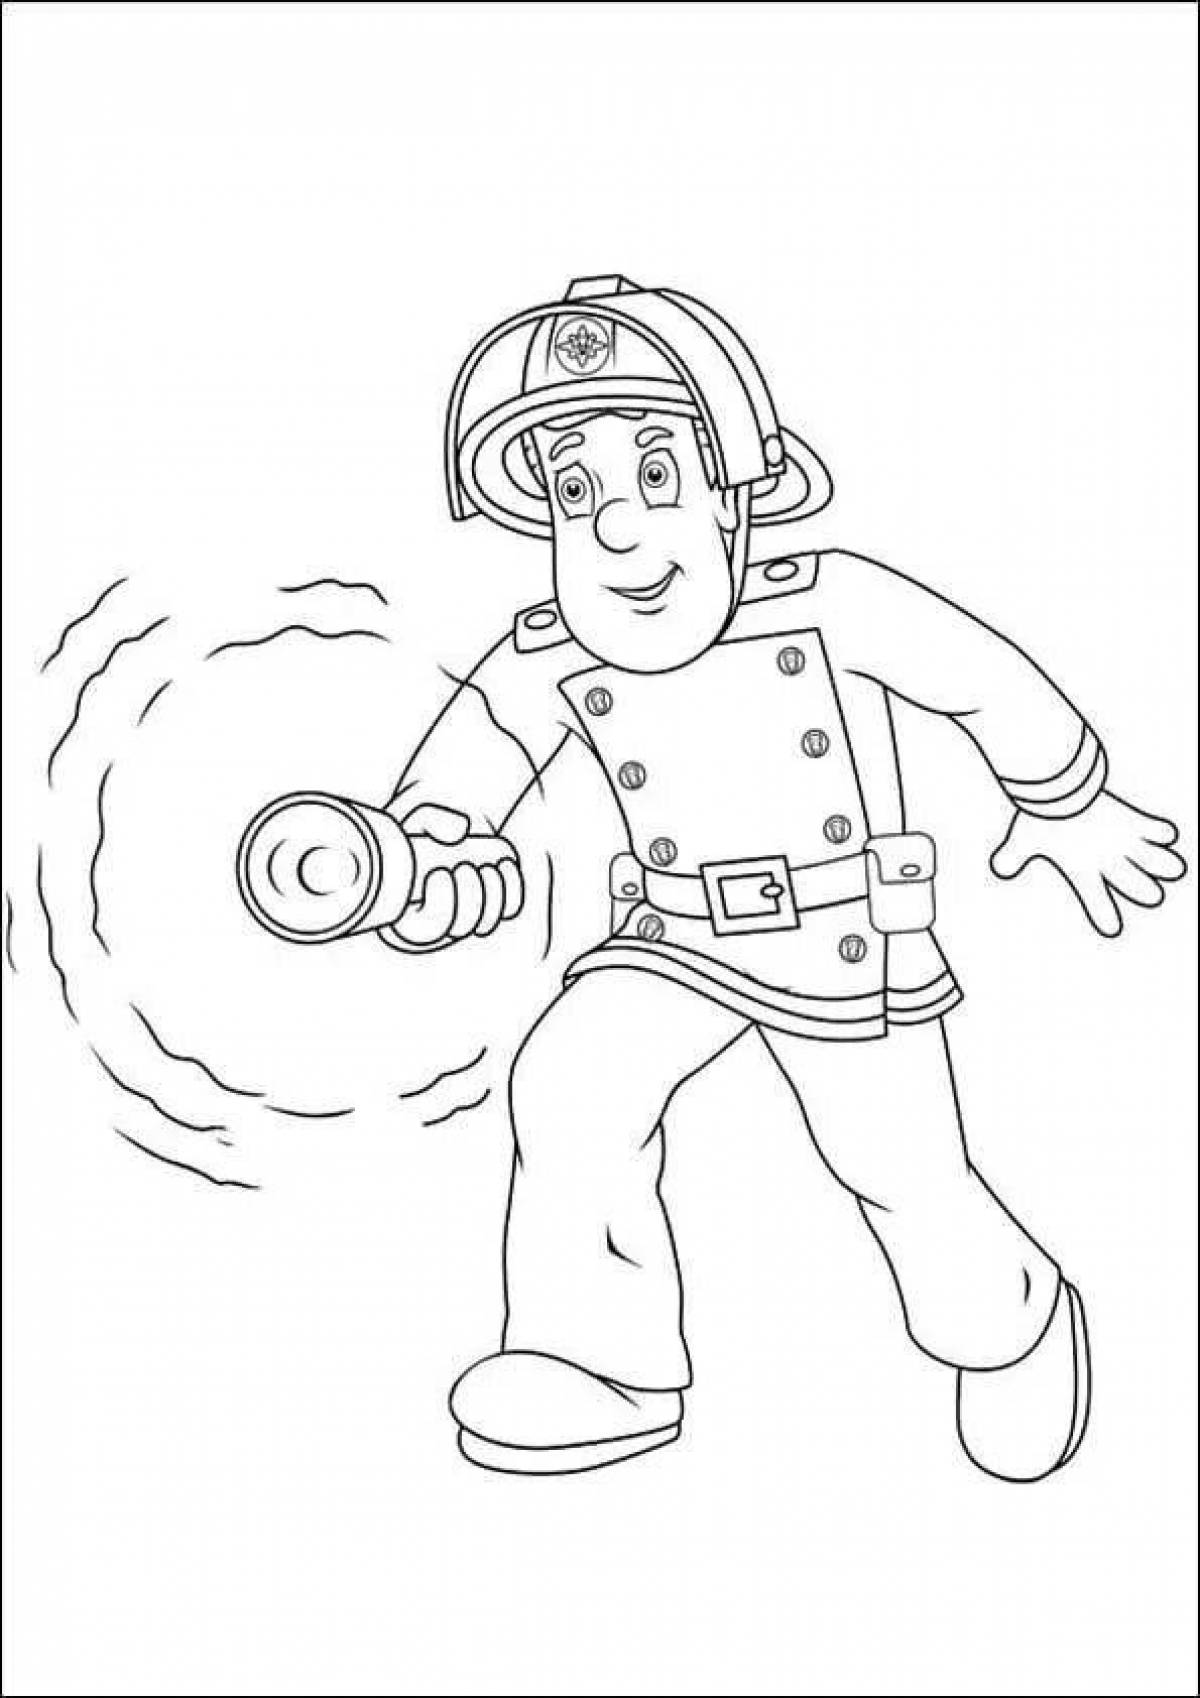 Coloring book is a fascinating profession of a firefighter